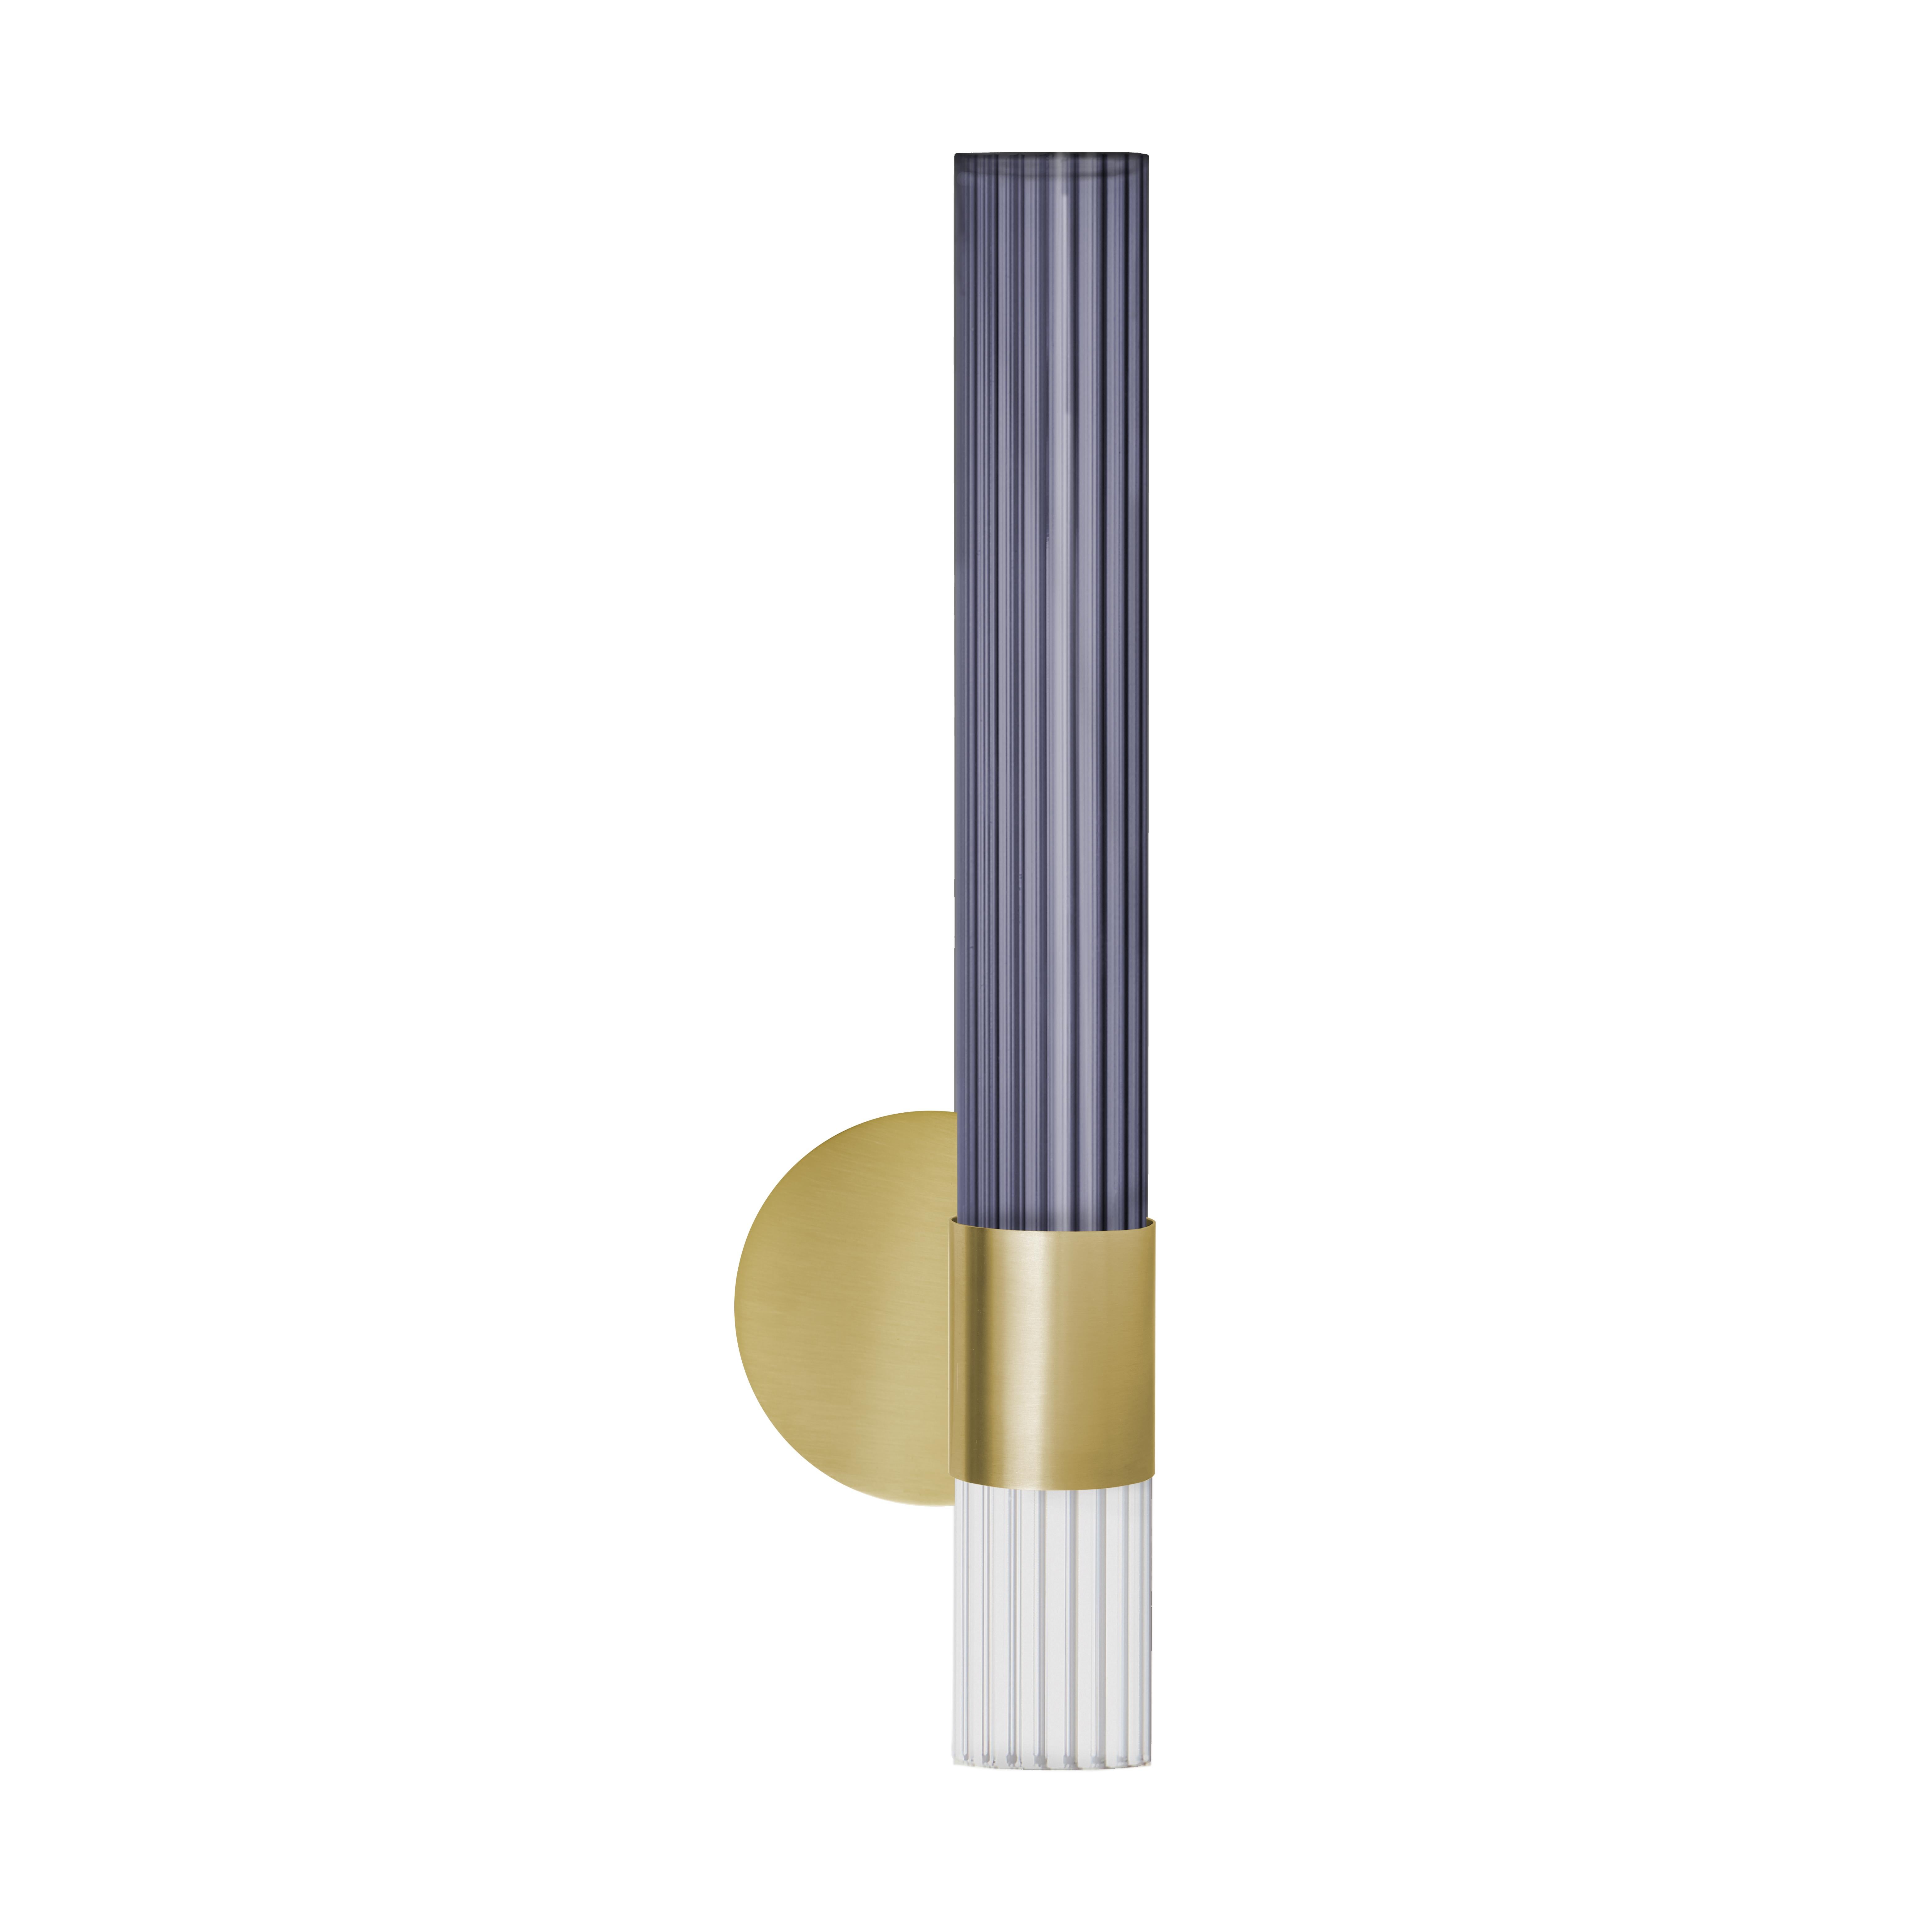 Sbarlusc wall lamp by Luce Tu
Dimensions: 49 x 13 cm
Materials: Brass and glass

State-of-the-art technology and craftsmanship come together in this wall lamp with an almost timeless charm. Like a precious jewel, the SW01 wall lamp is perfect